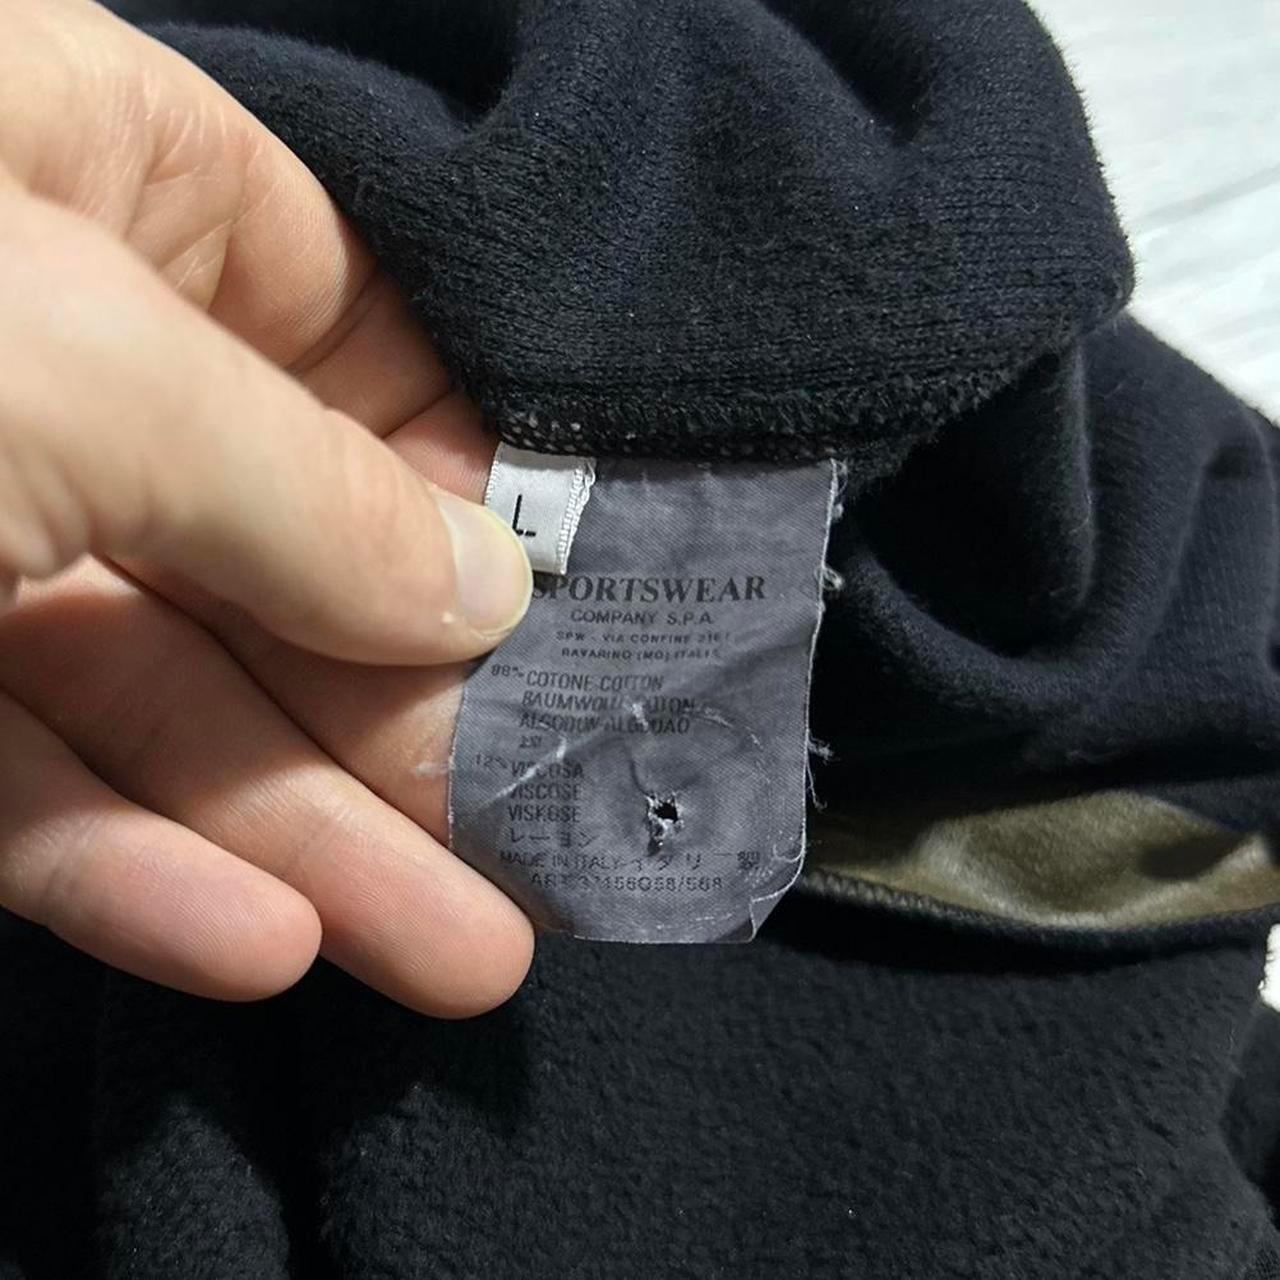 Stone Island Black Quarter Button Up Pullover - Known Source